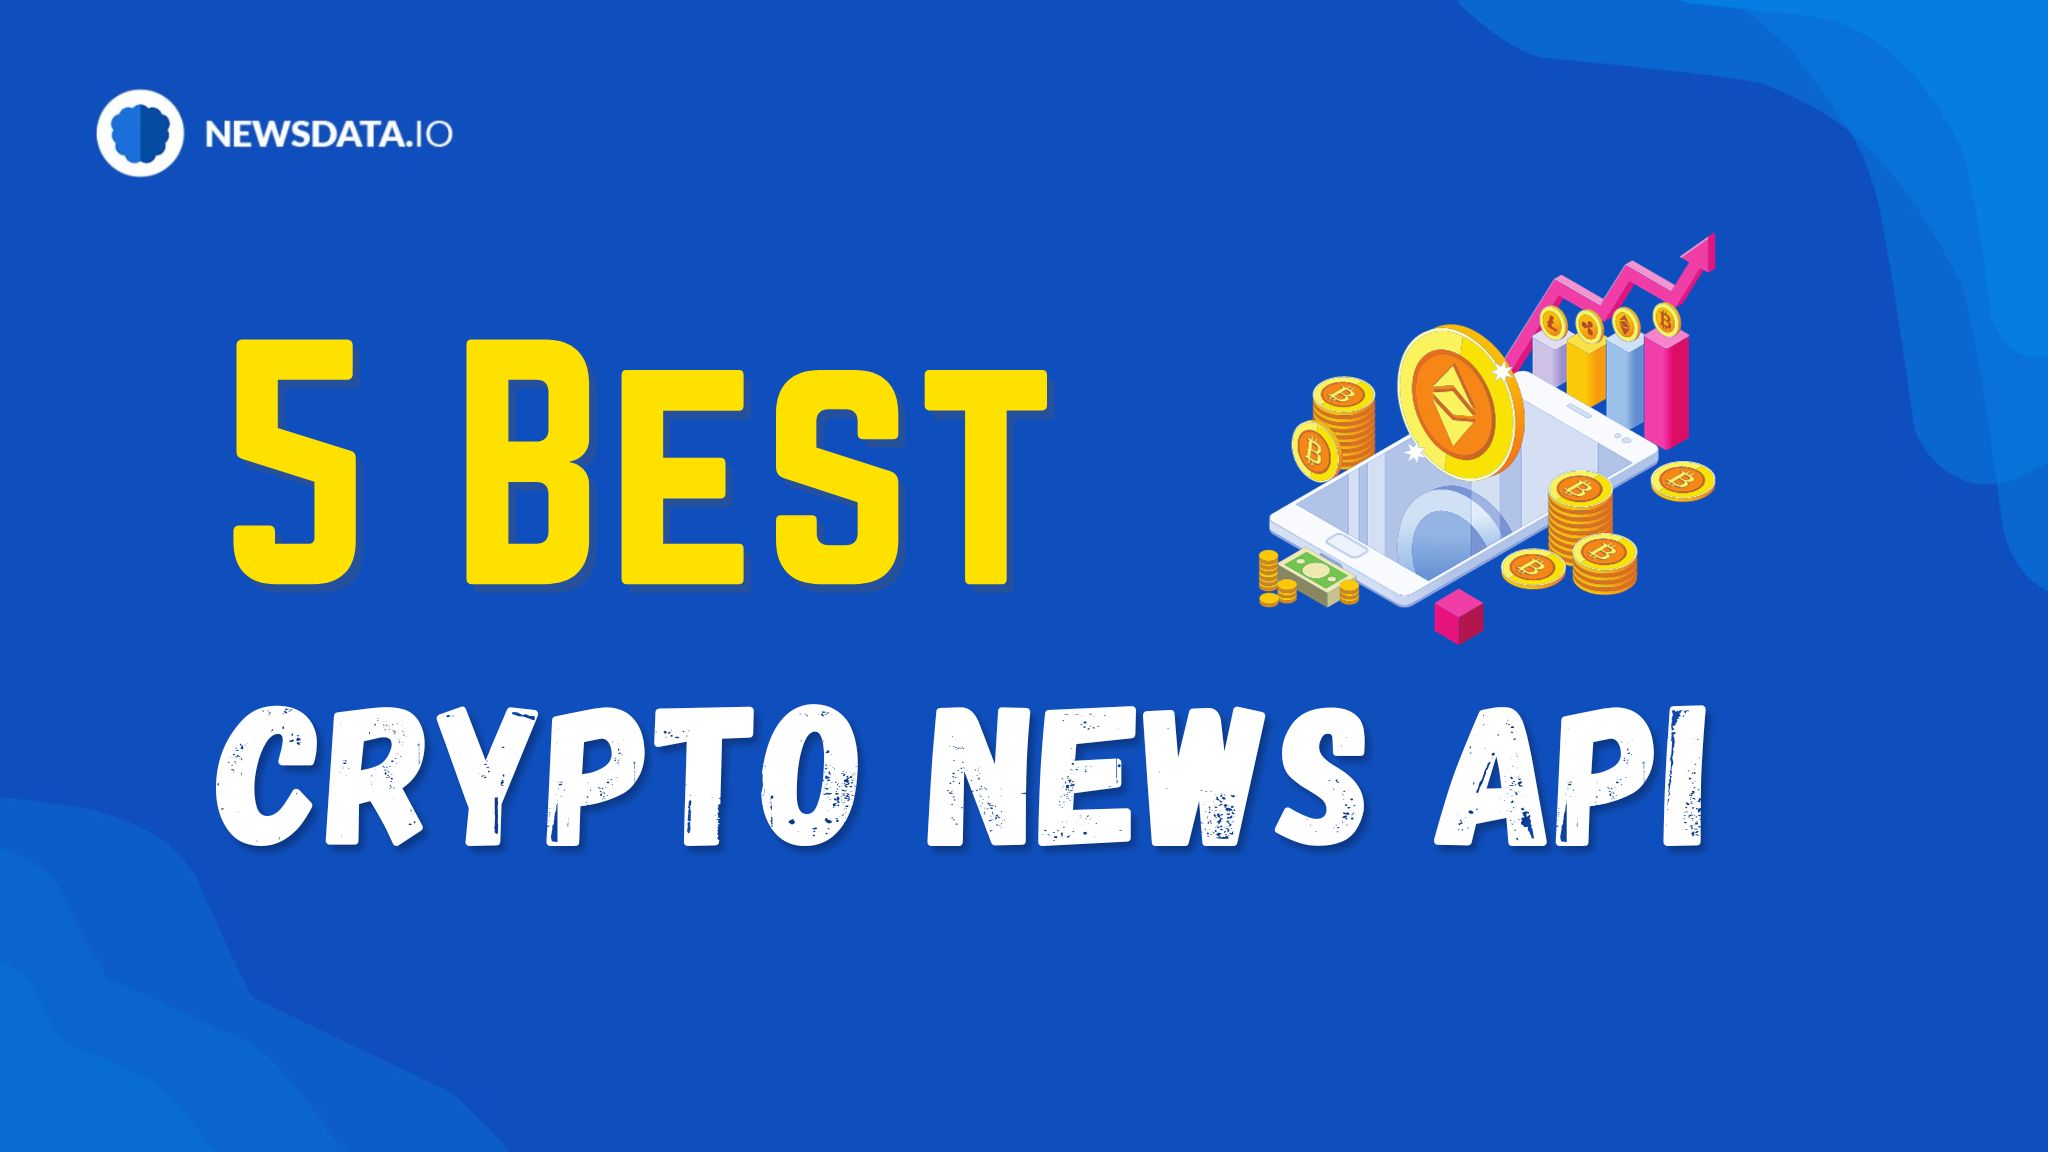 Cryptocurrency news aggregation platform with filter and customization abilities | ecobt.ru